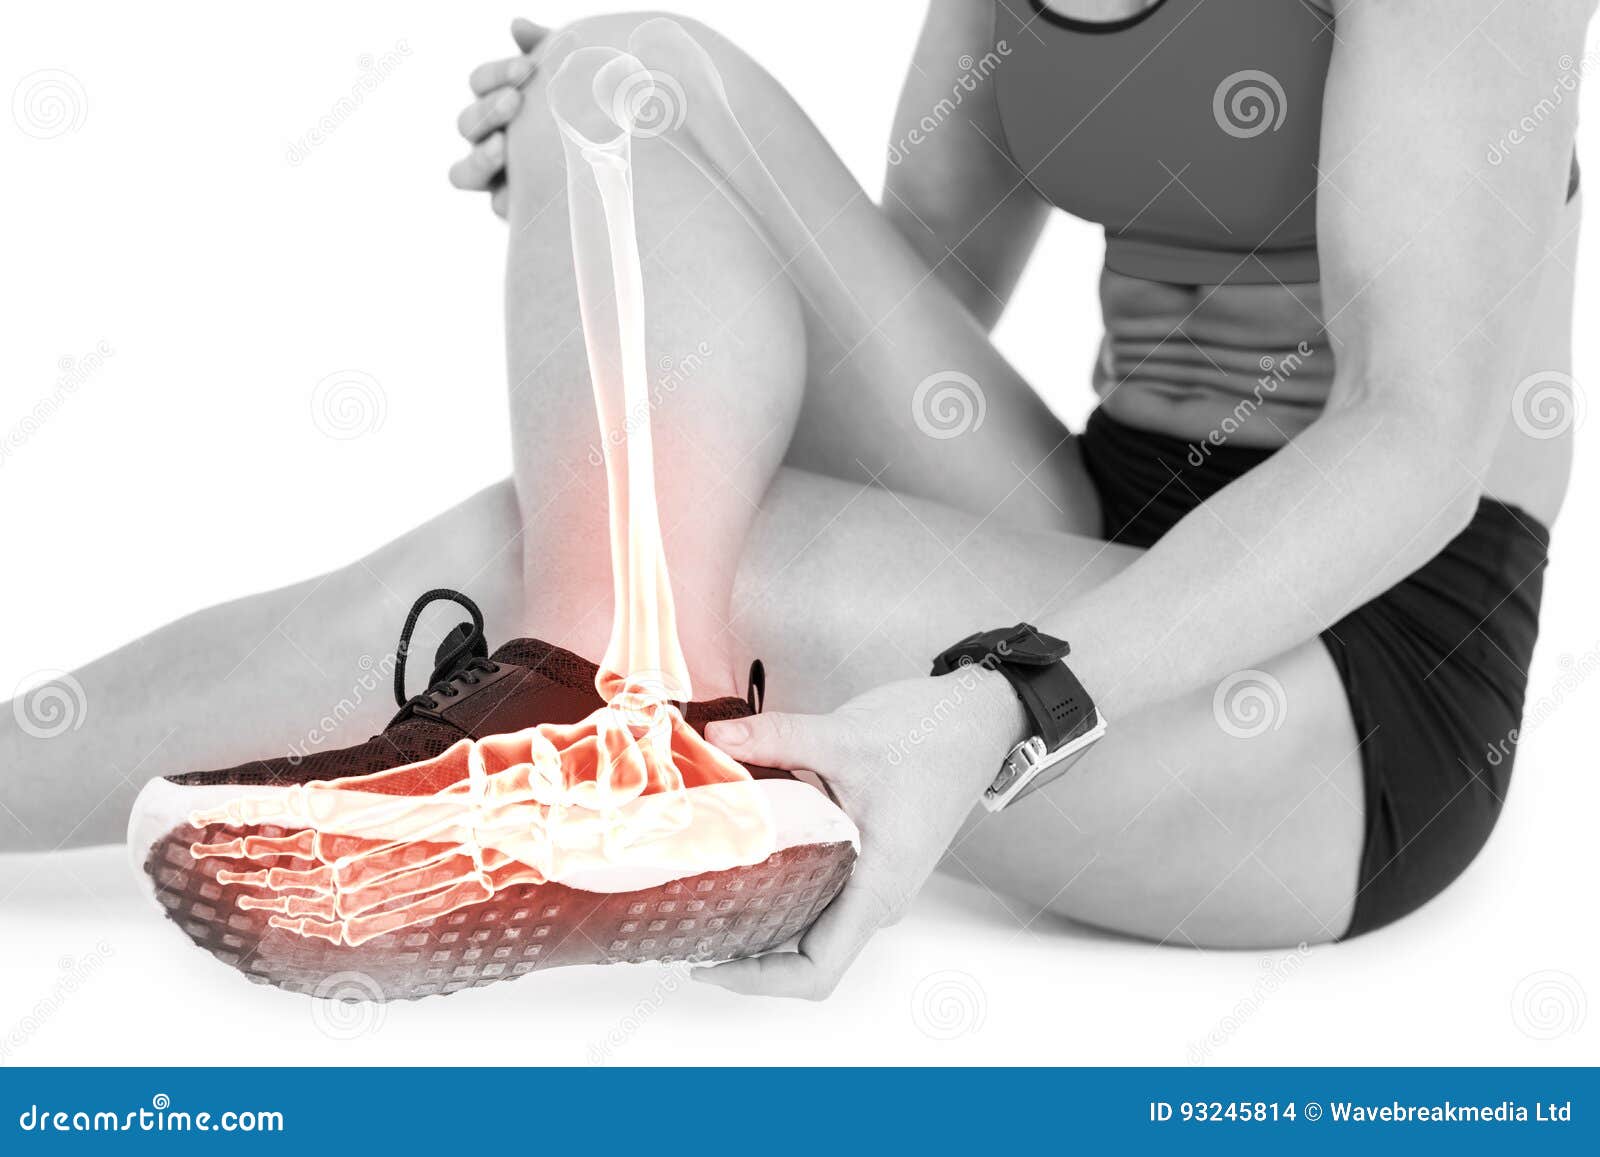 low section of female athlete suffering from ankle pain on white background